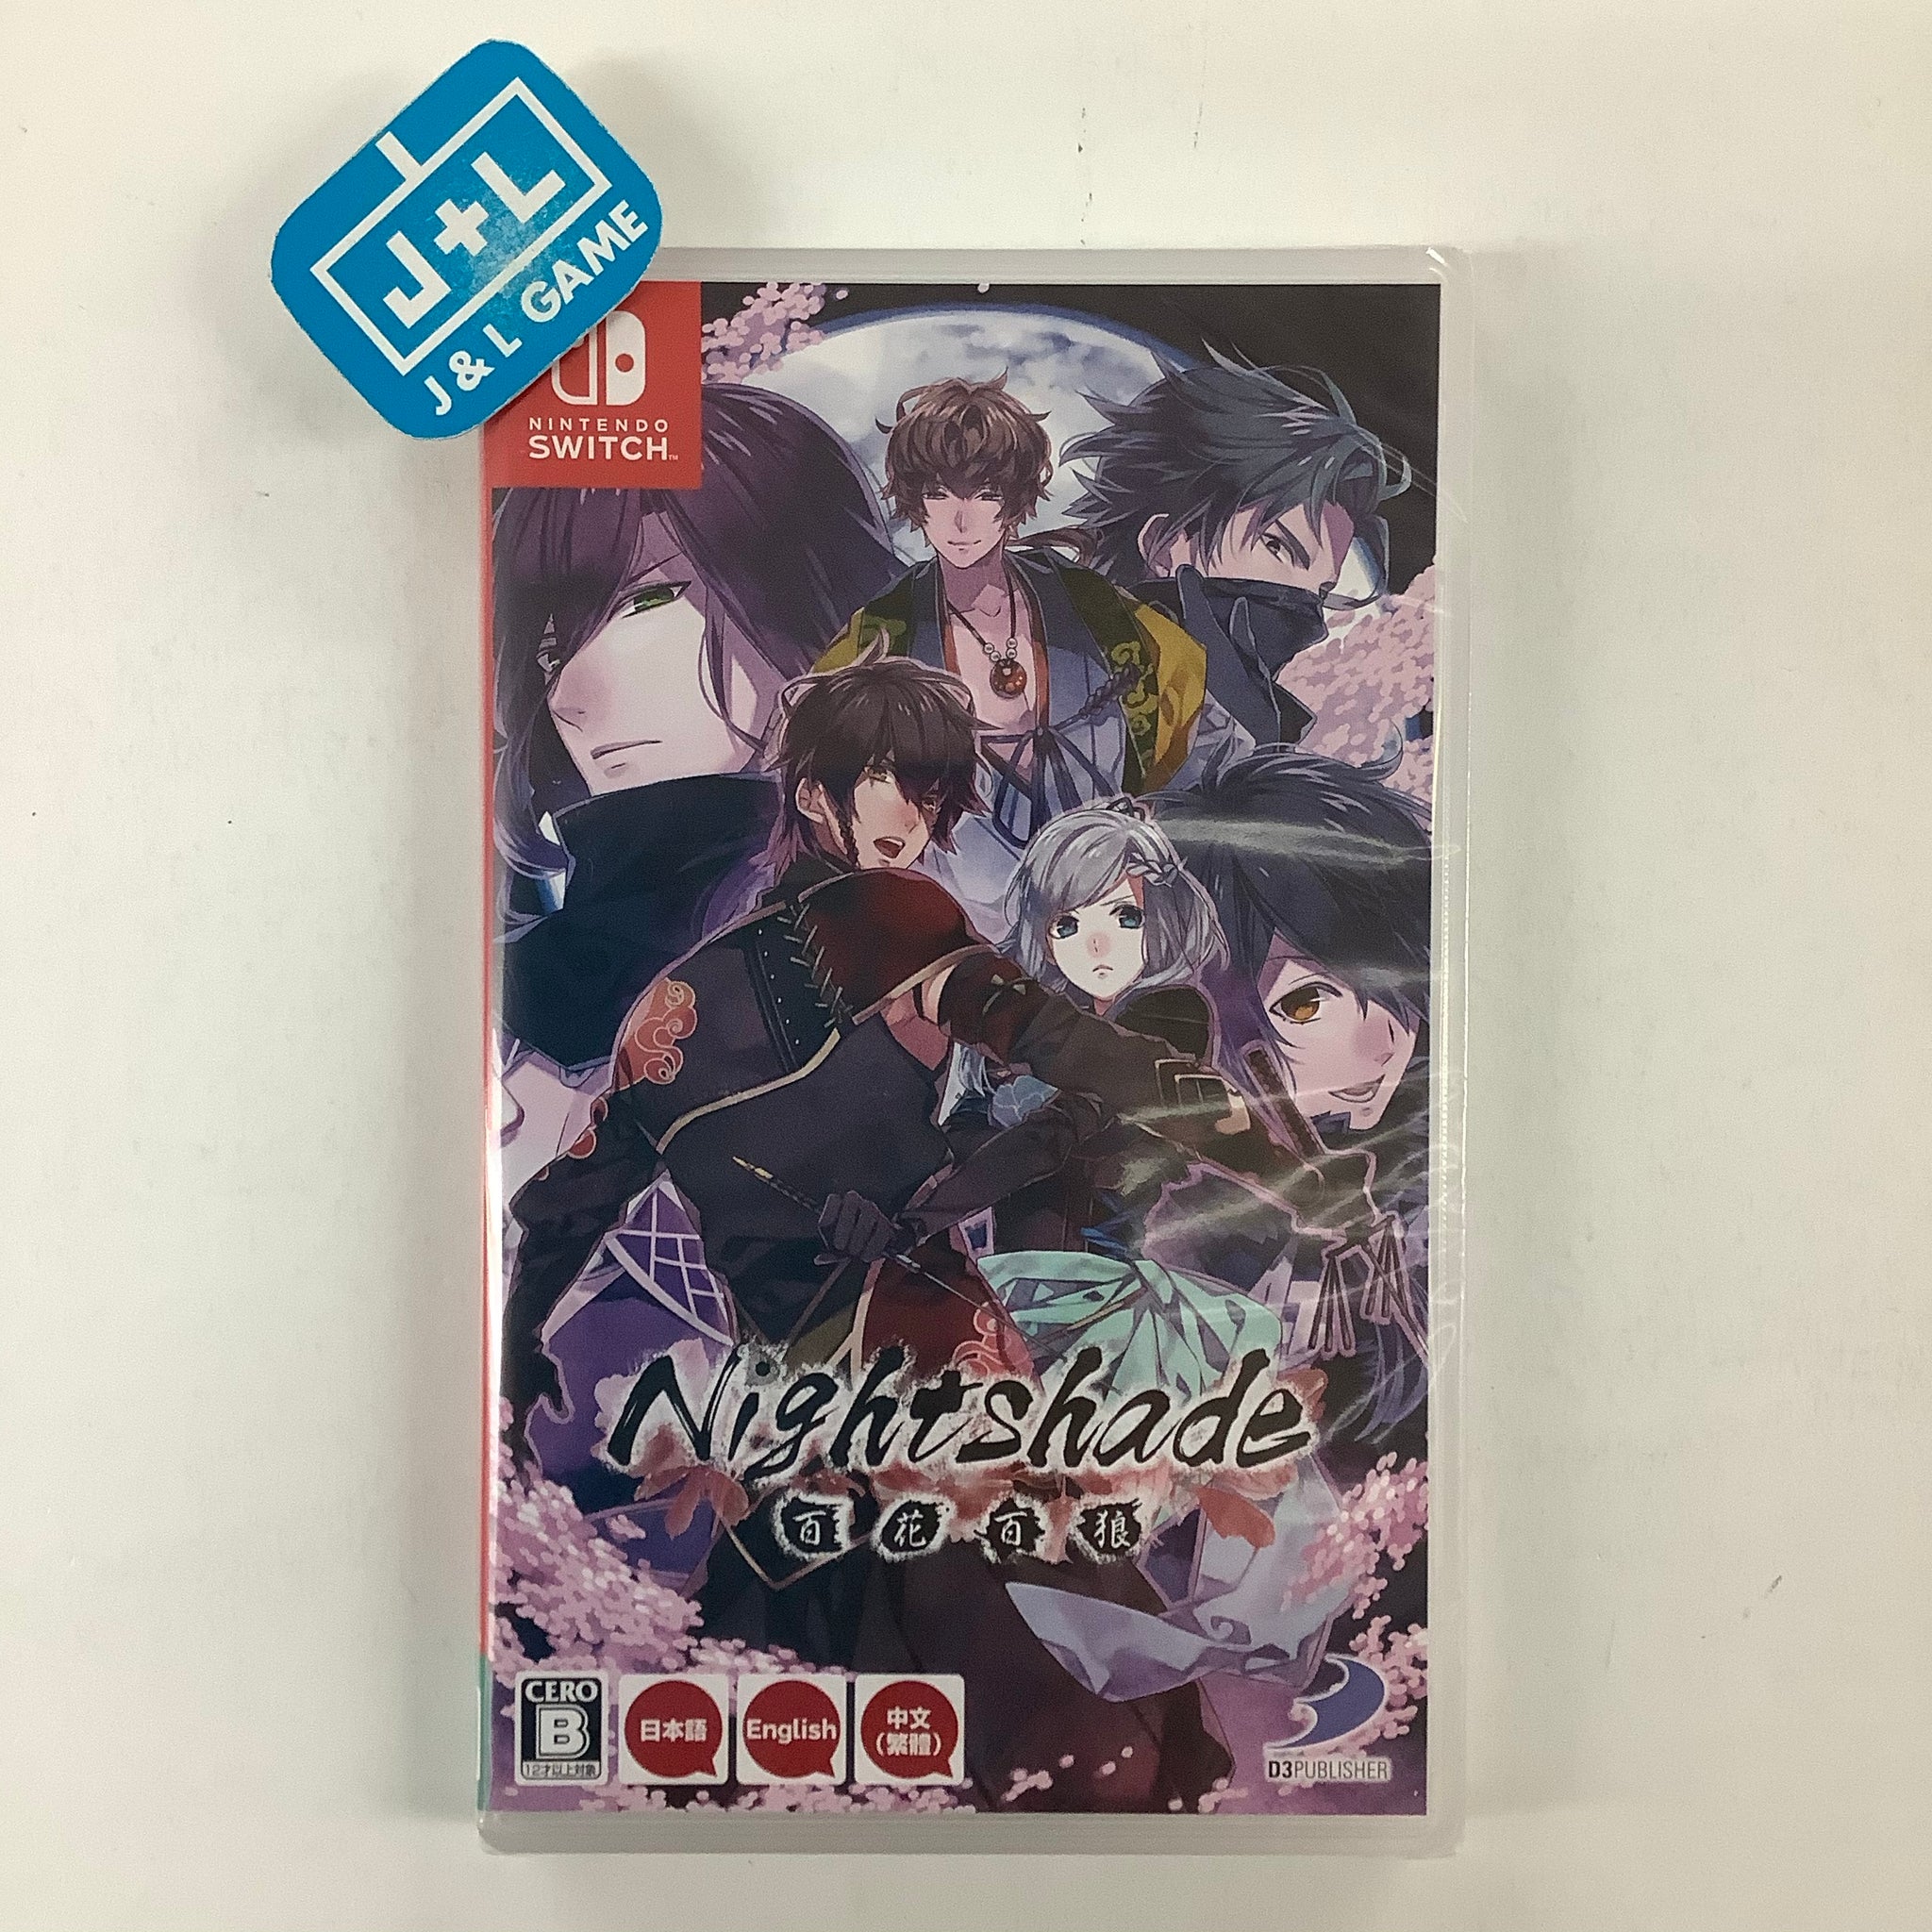 NightShade - (NSW) Nintendo Switch (Japanese Import) Video Games D3Publisher   